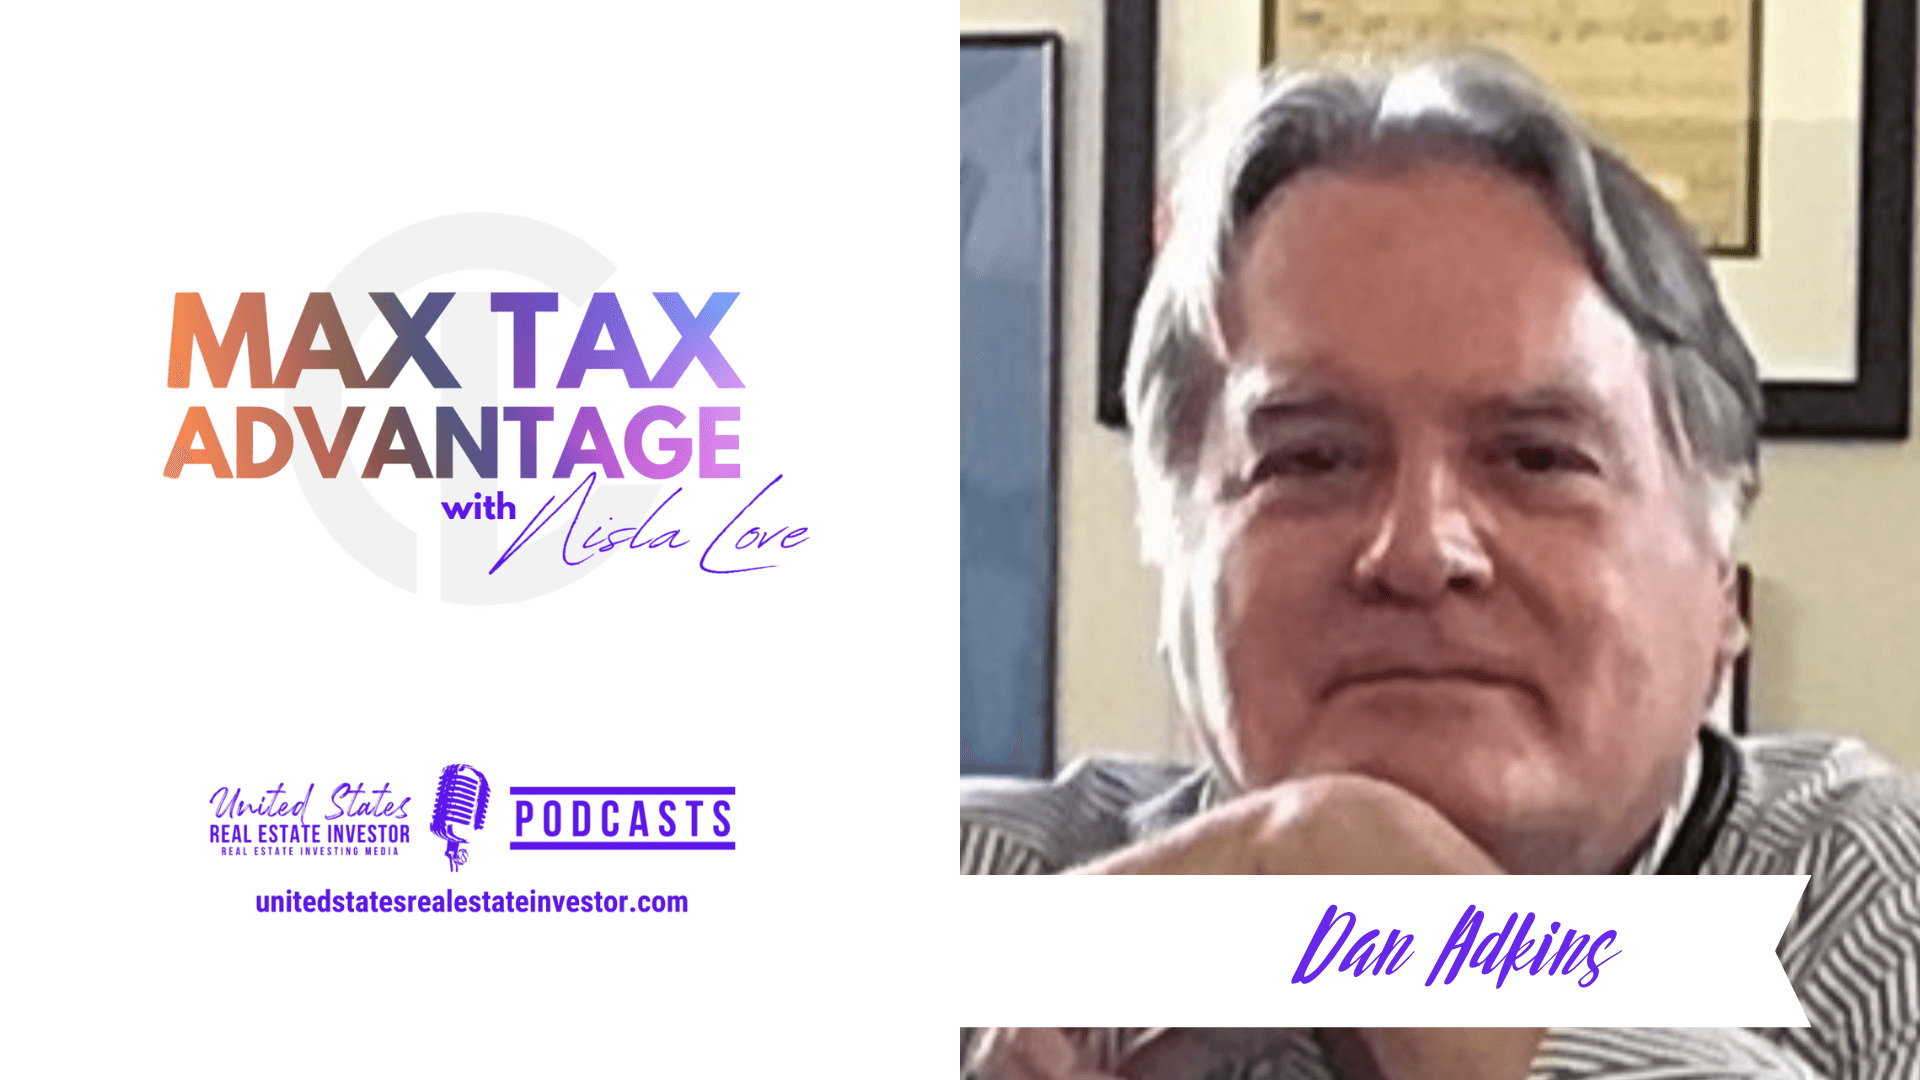 How Small Business Coaching Can Accelerate Achieving Your Vision with Dan Adkins on Max Tax Advantage with Nisla Love